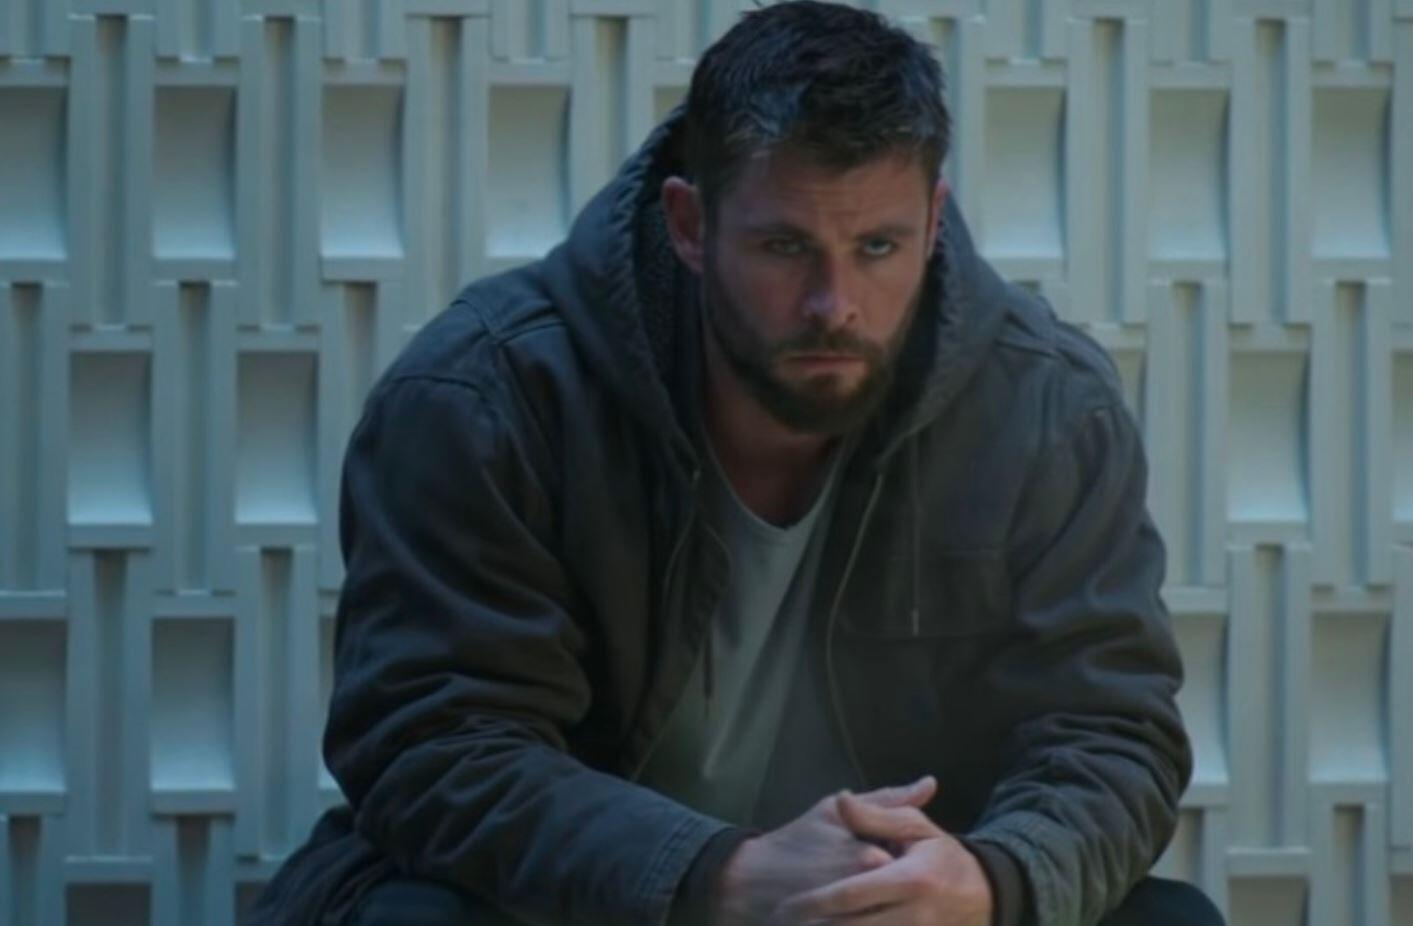 Report: Chris Hemsworth Done With MCU After 'Avengers: Endgame'